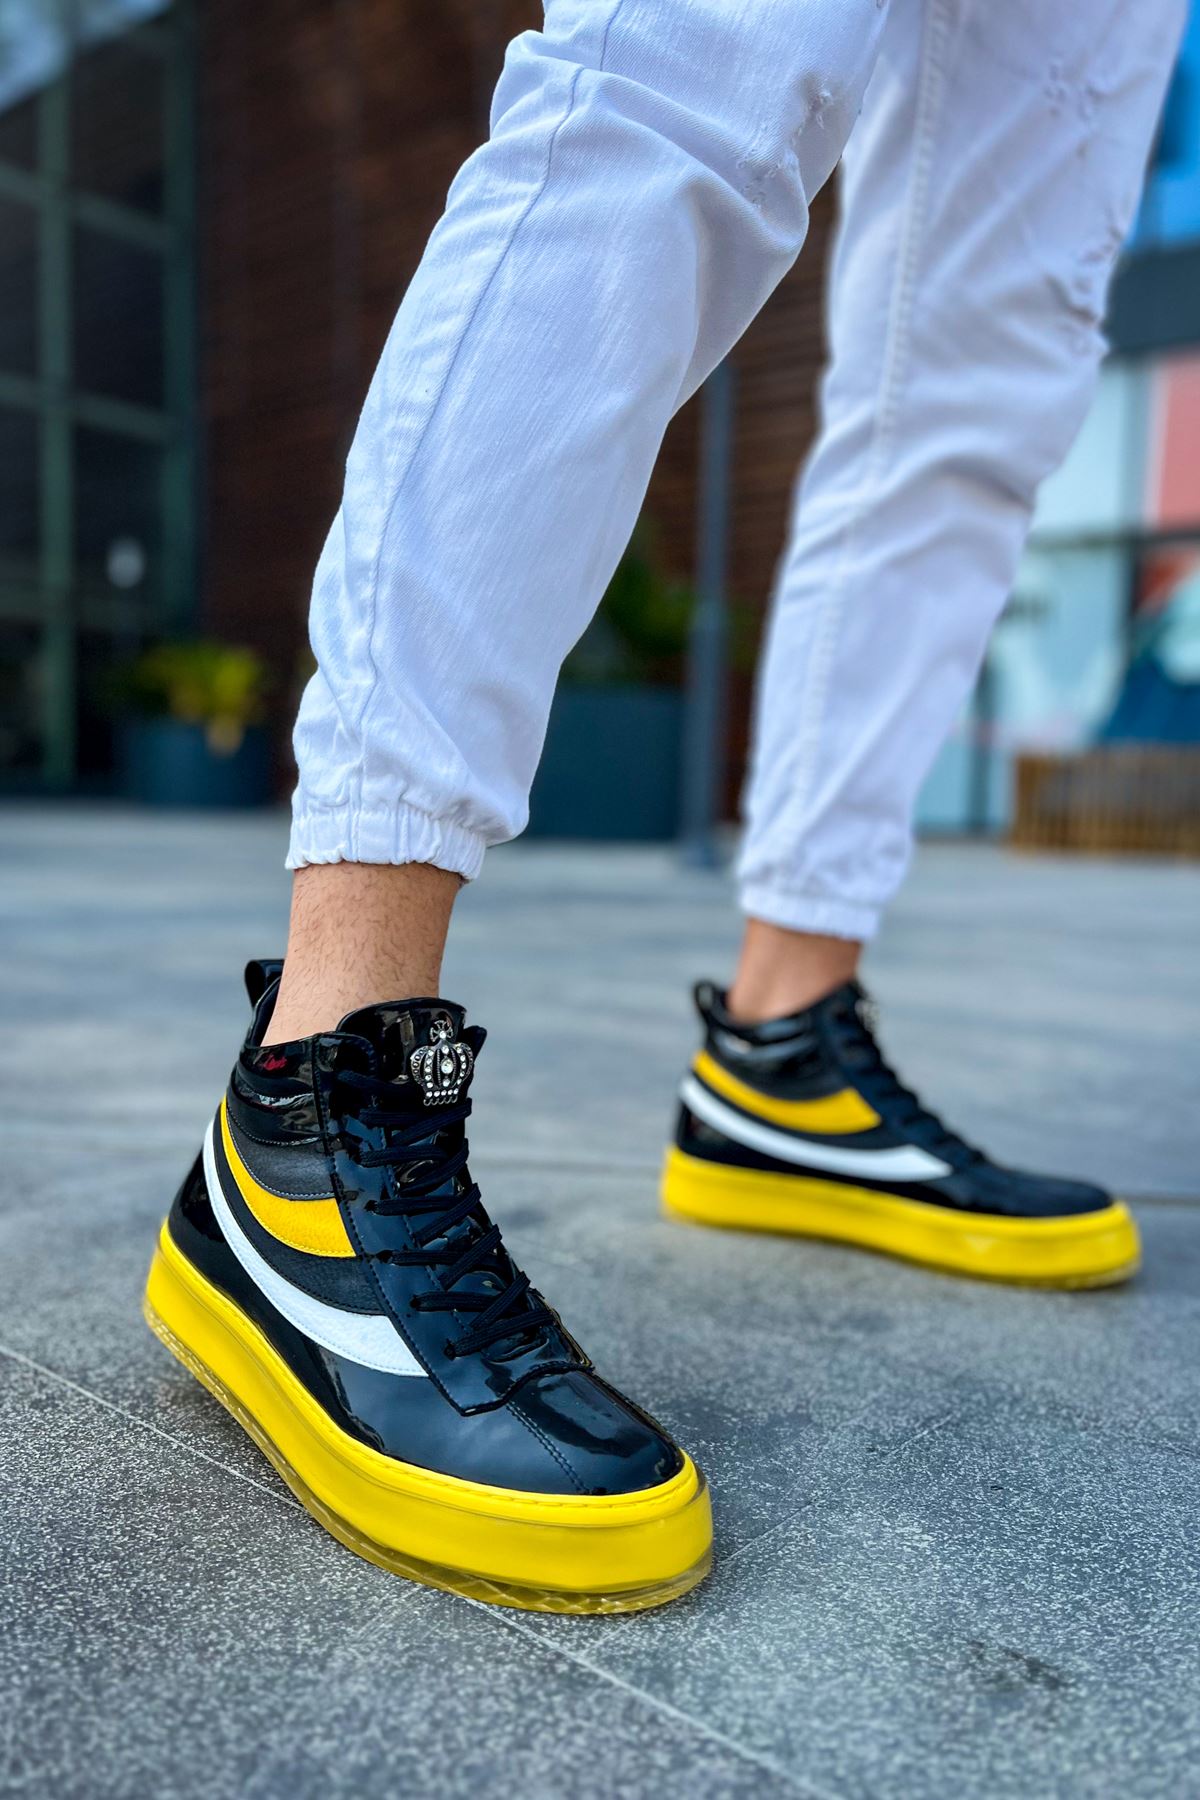 CH973 Majesty SRT Men's Sneakers Shoes Boots YELLOW - STREETMODE ™